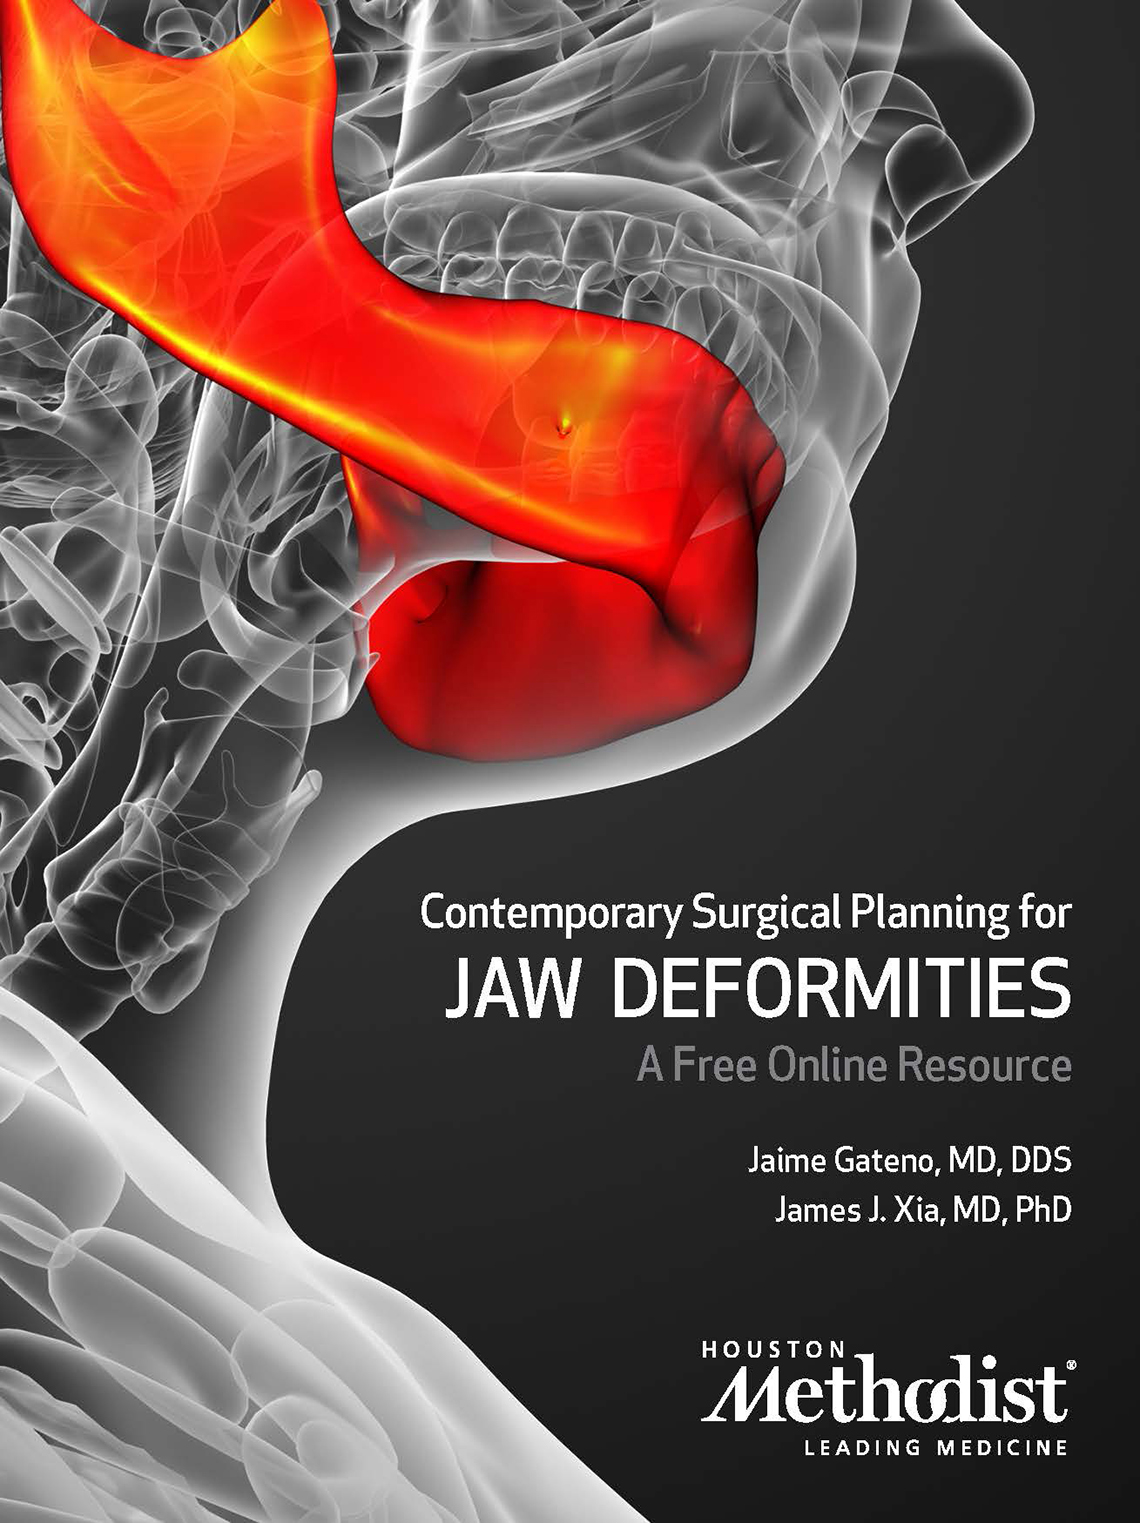 Contemporary Surgical Planning For Jaw Deformities: A Free Online Resource Book COver